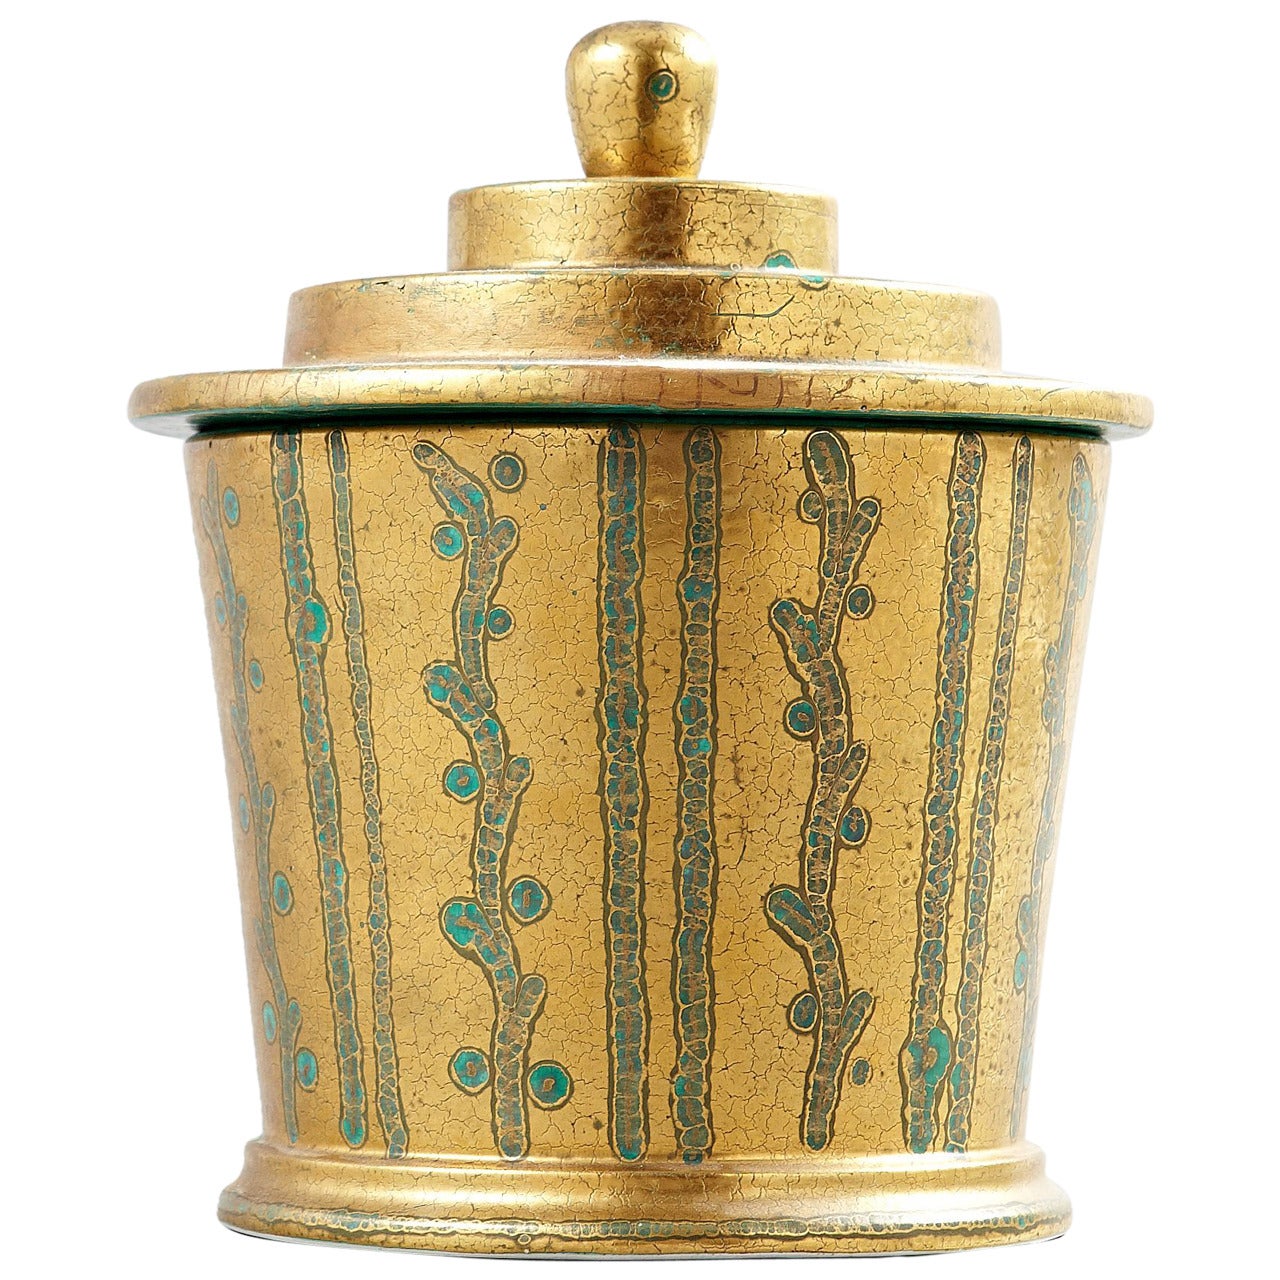 Wilhelm Kage Gilt Tobacco Jar with Tendril Ornament, Signed 1930 For Sale